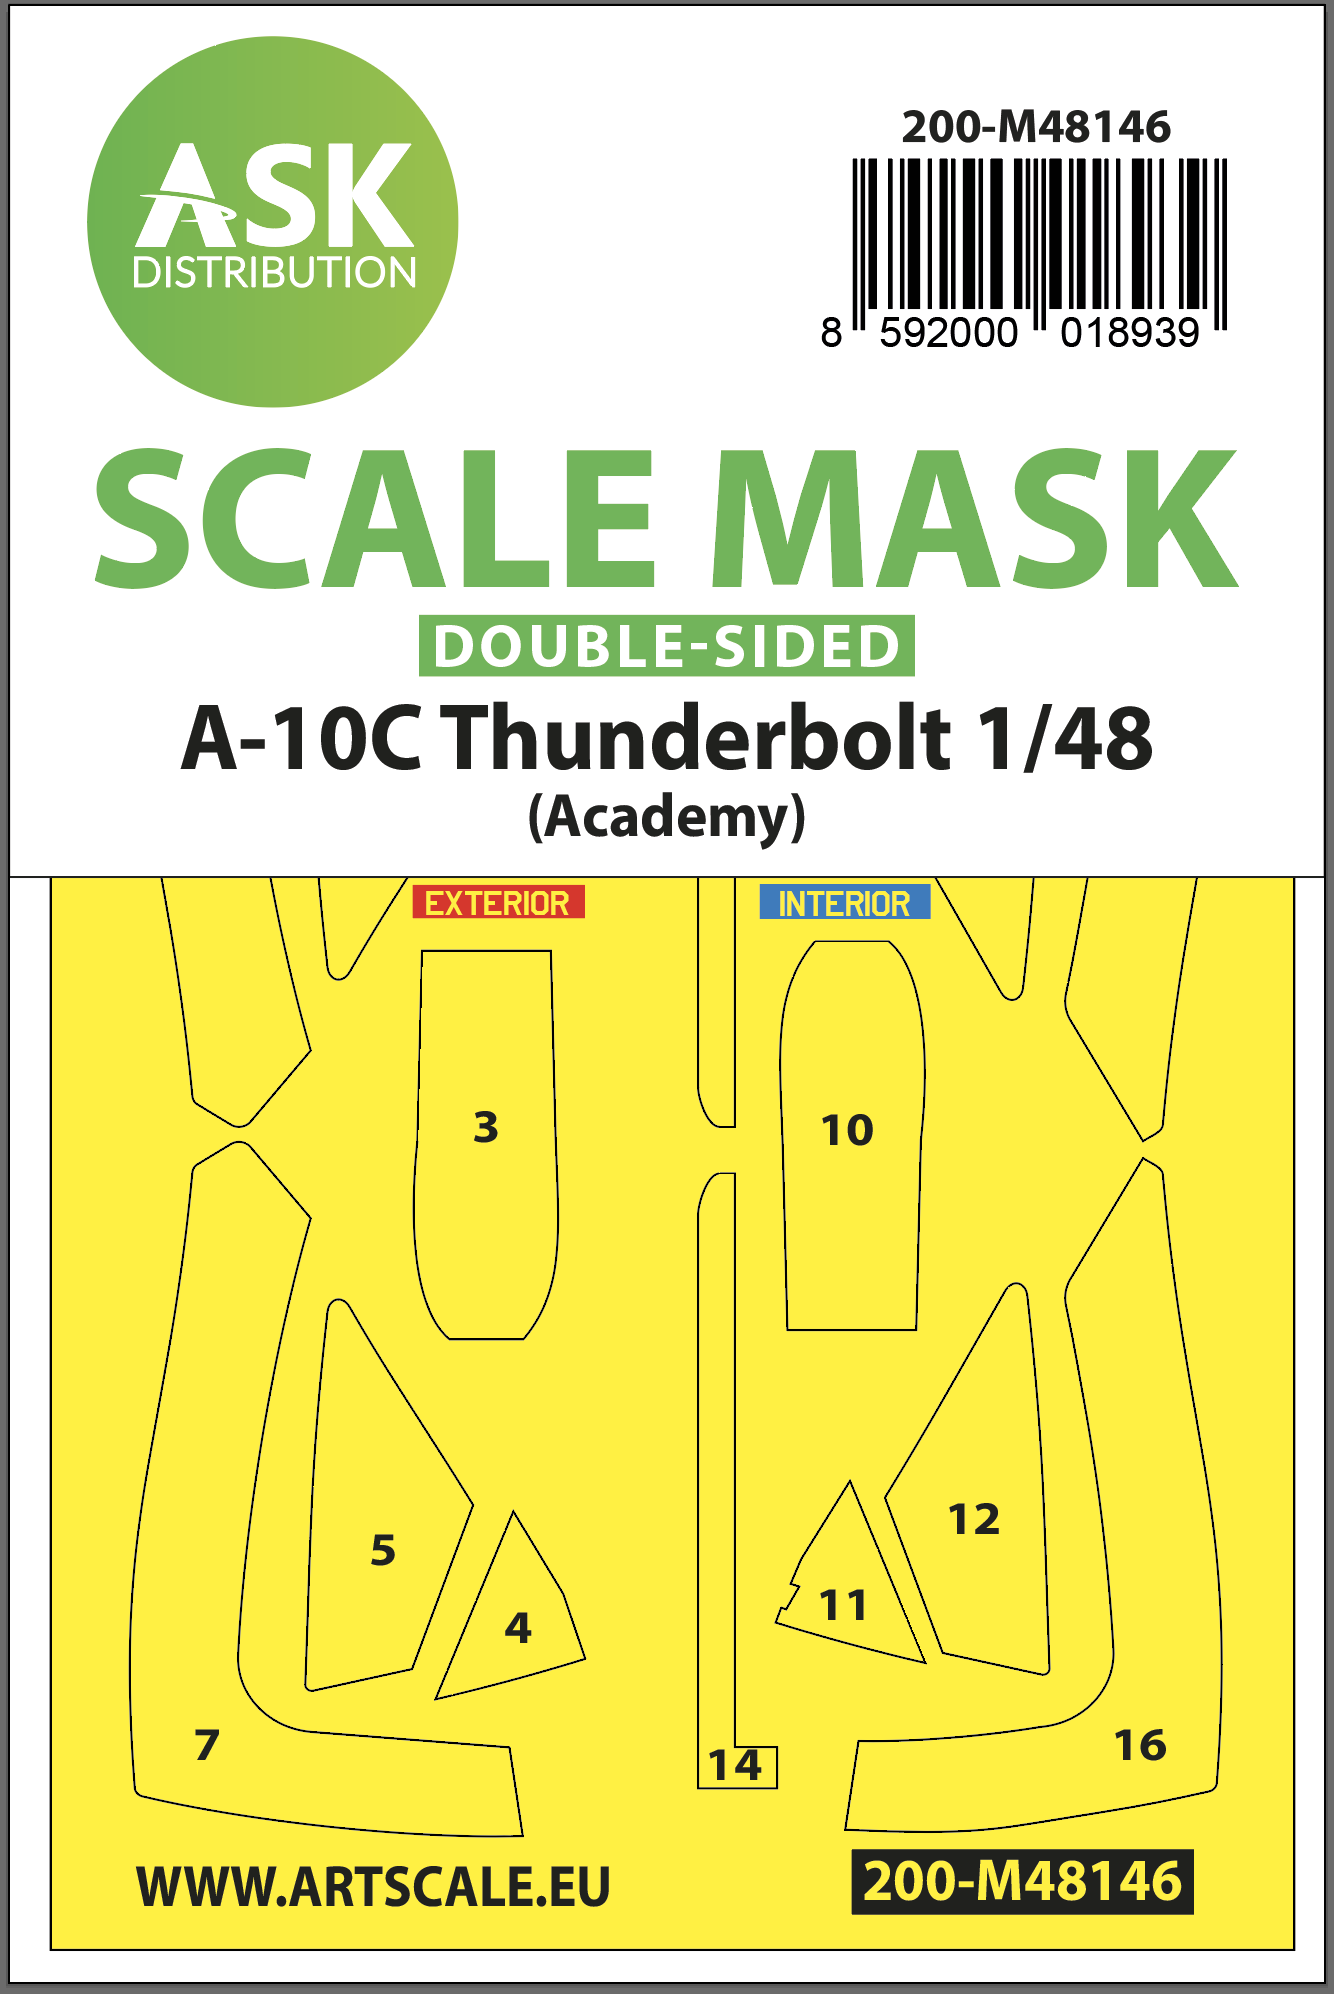 1/48 A-10C Thunderbolt double-sided express fit mask for Academy